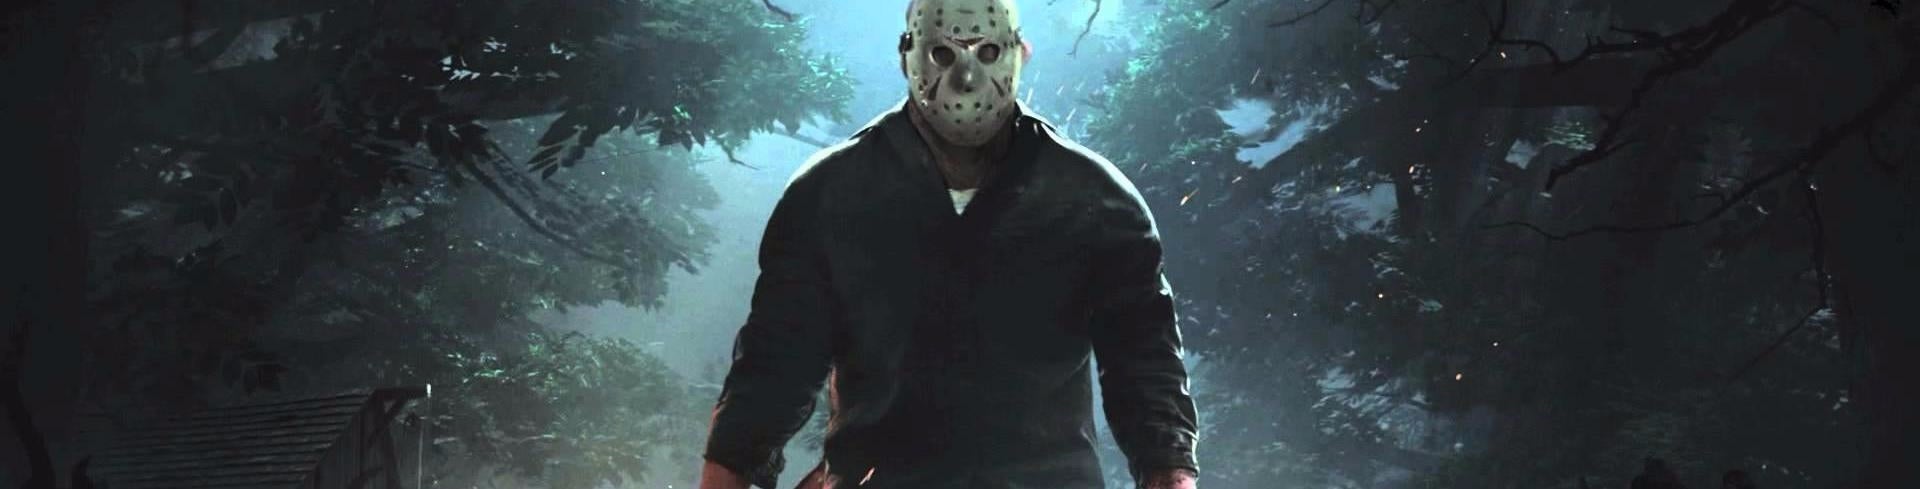 Image for Friday the 13th review